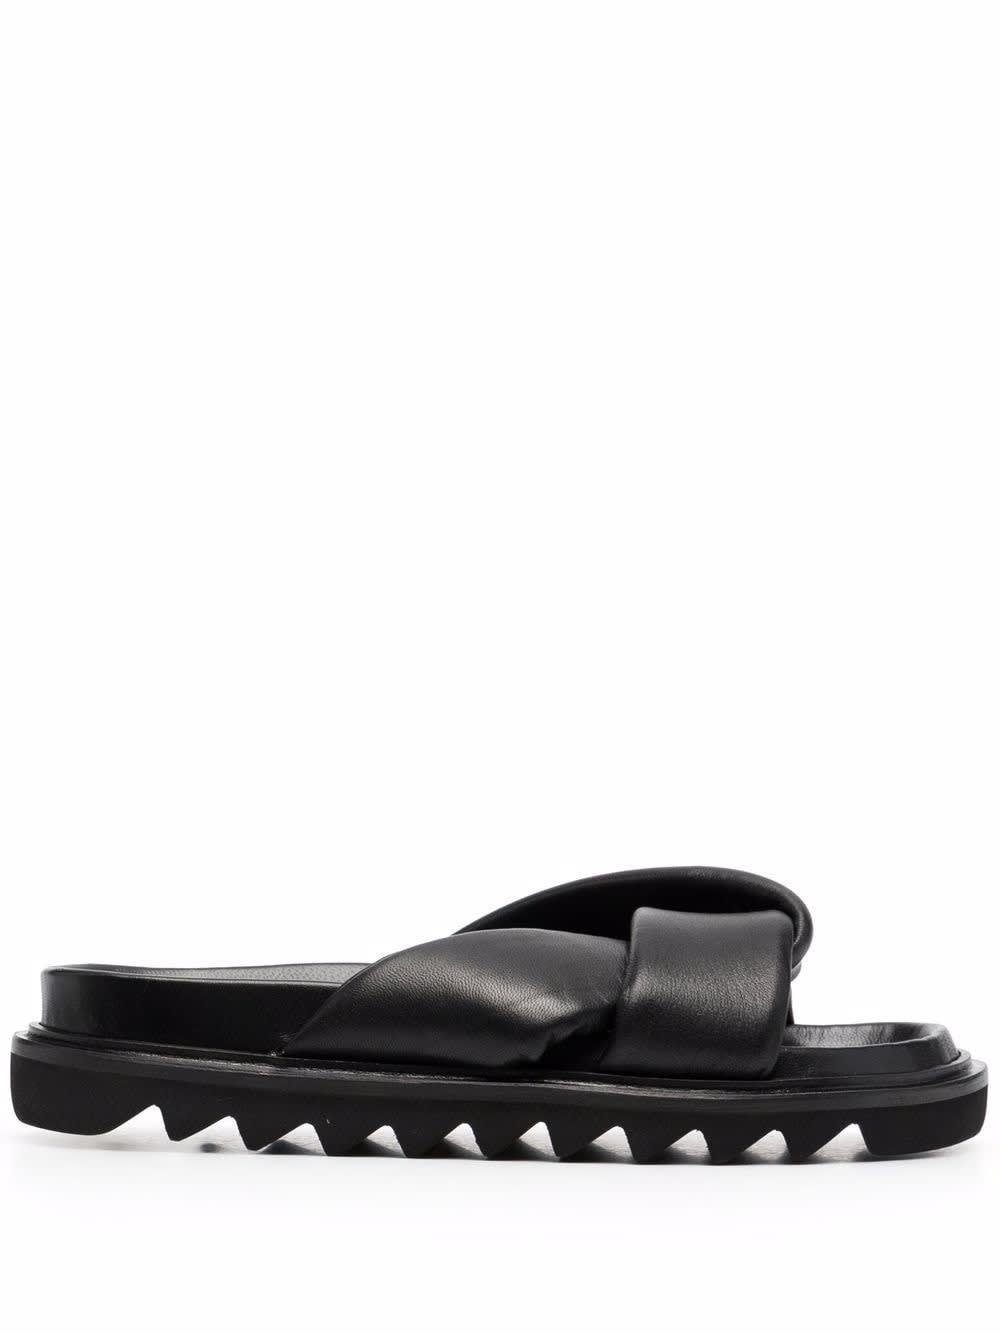 STUDIO AMELIA LEATHER SANDALS WITH KNOT DETAIL,F108BLKBLK